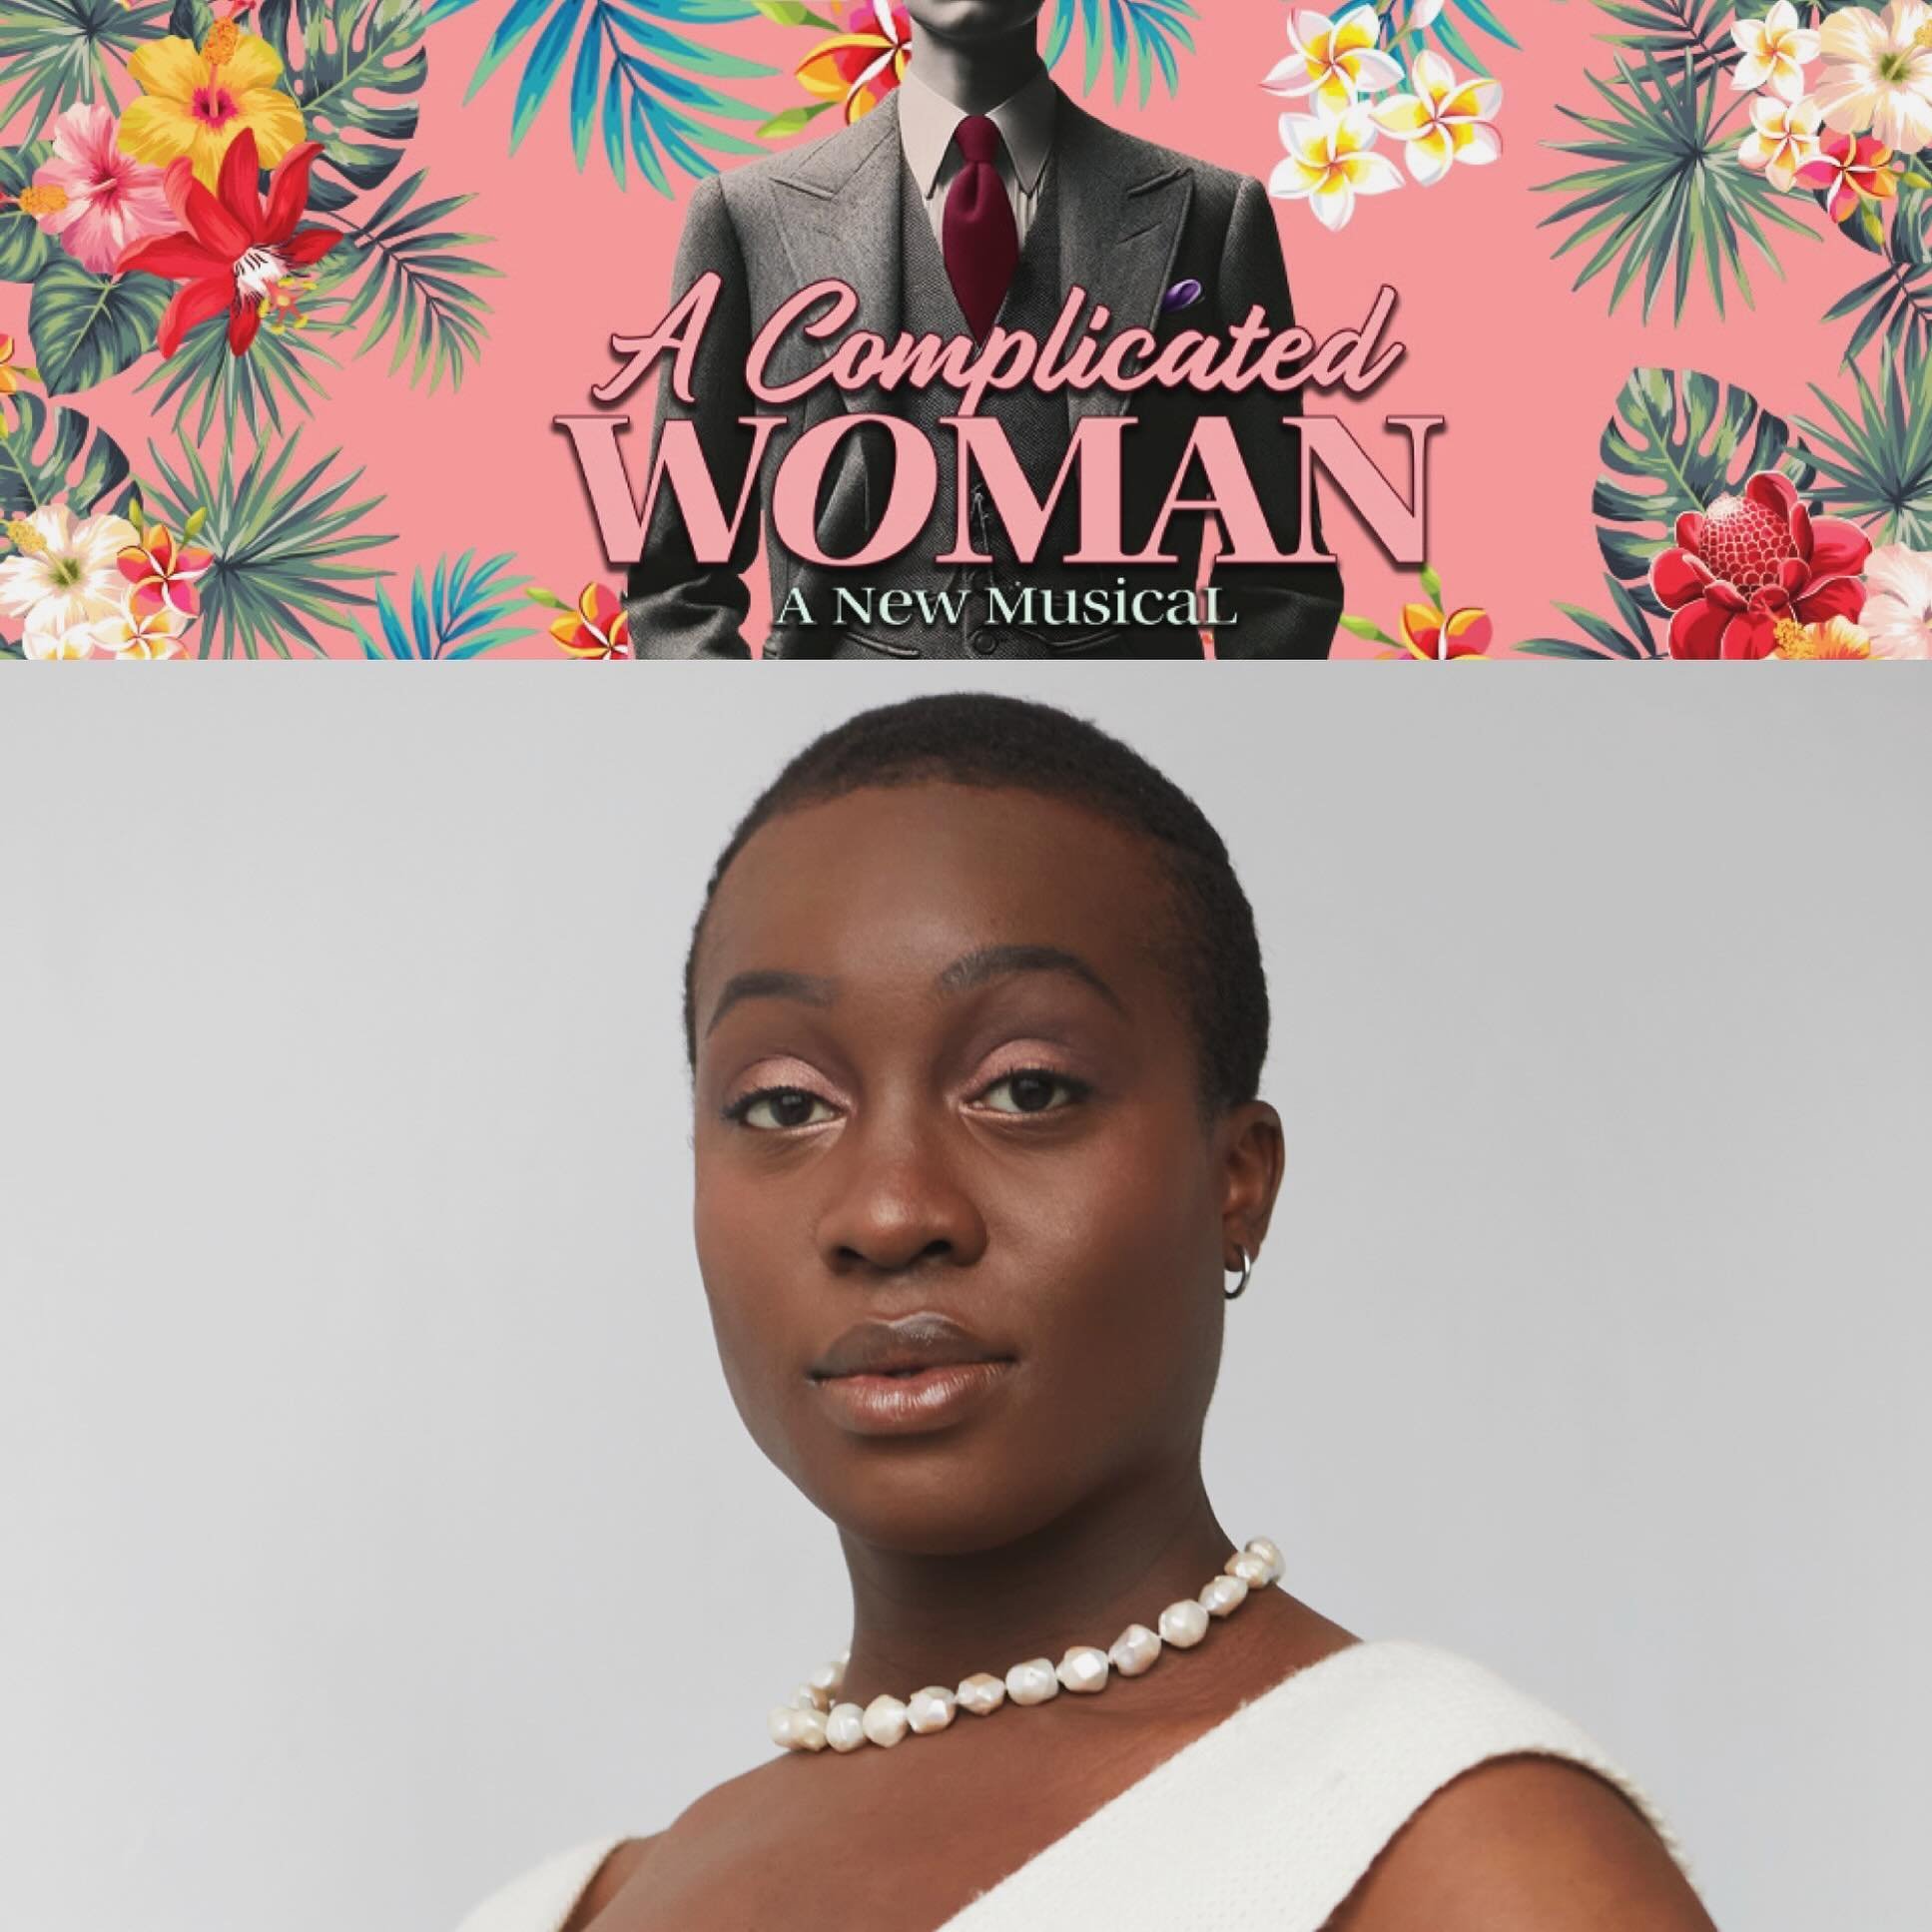 Happy Opening Night to @basit_ in the premiere of A COMPLICATED WOMAN at @goodspeedmusicals! ⭐️